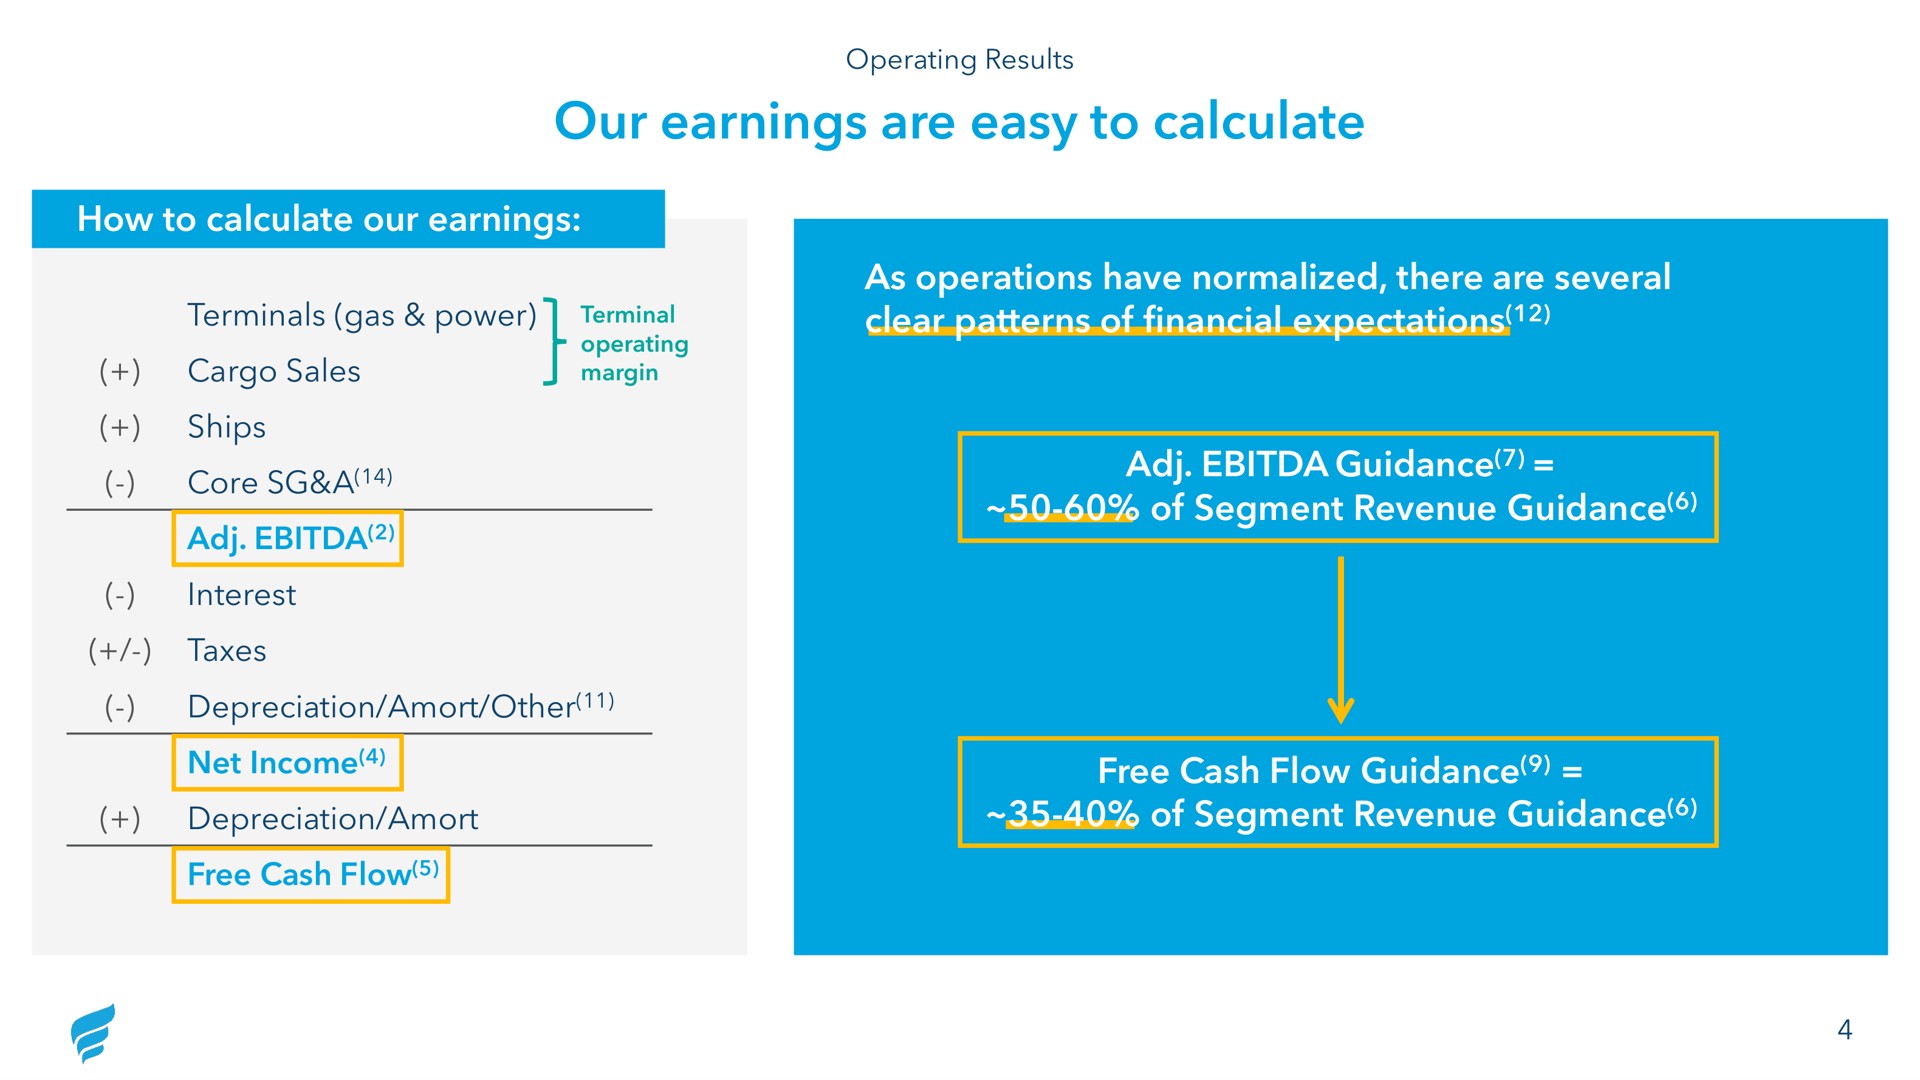 our earnings are easy to calculate how to calculate our earnings as operations have normalized there are several clear patterns of financial expectations guidance of segment revenue guidance free cash flow guidance of segment revenue guidance terminals gas power terminal core a ford yor reve depreciation amort | NewFortress Energy